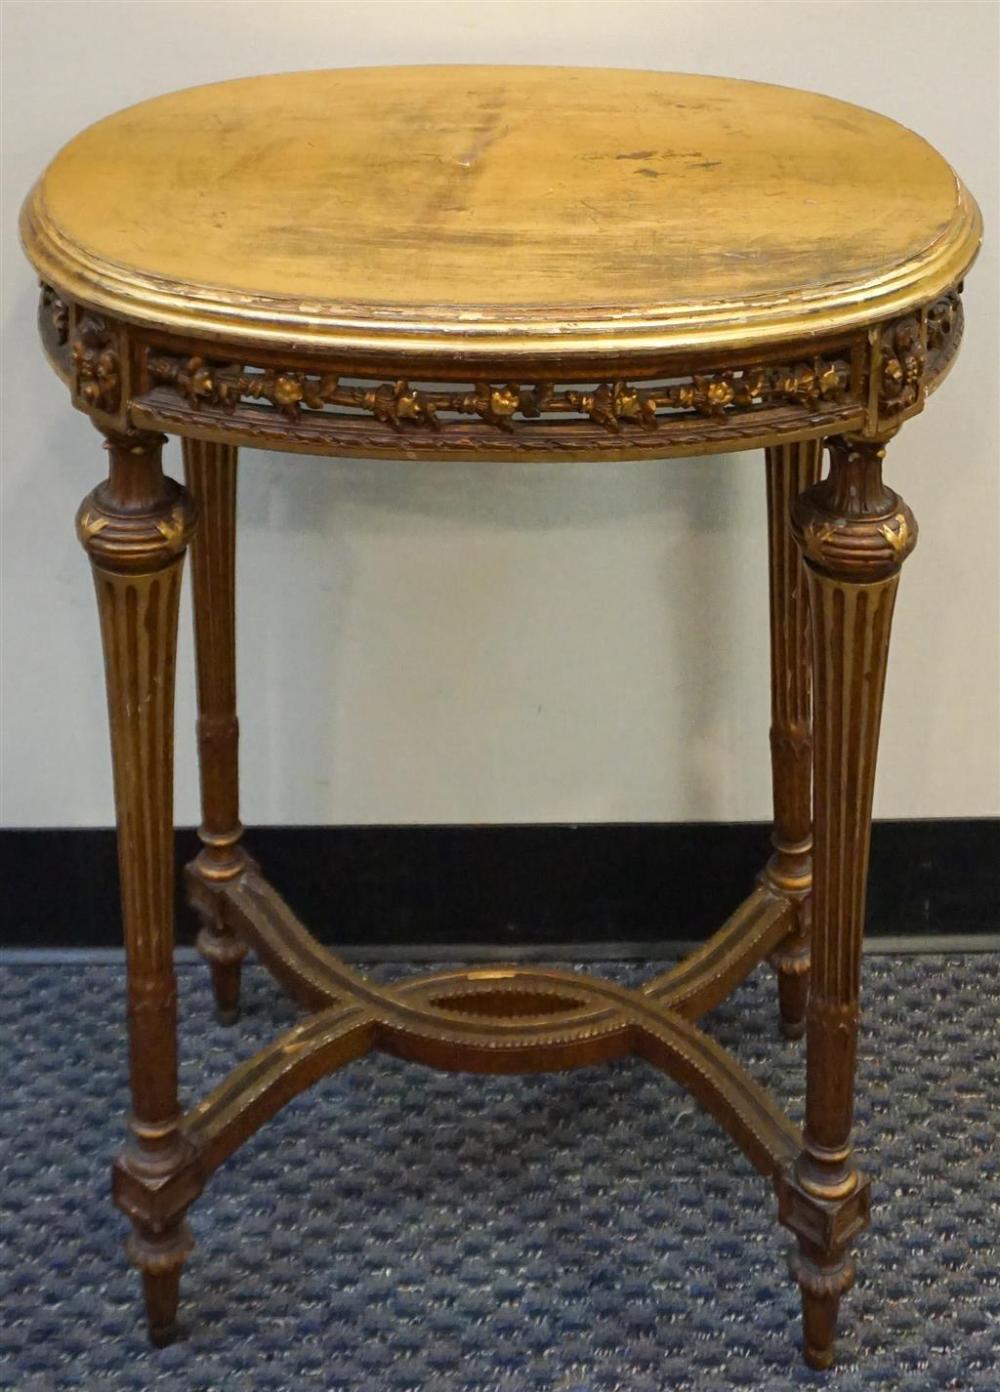 LOUIS XVI STYLE GILTWOOD OVAL SIDE